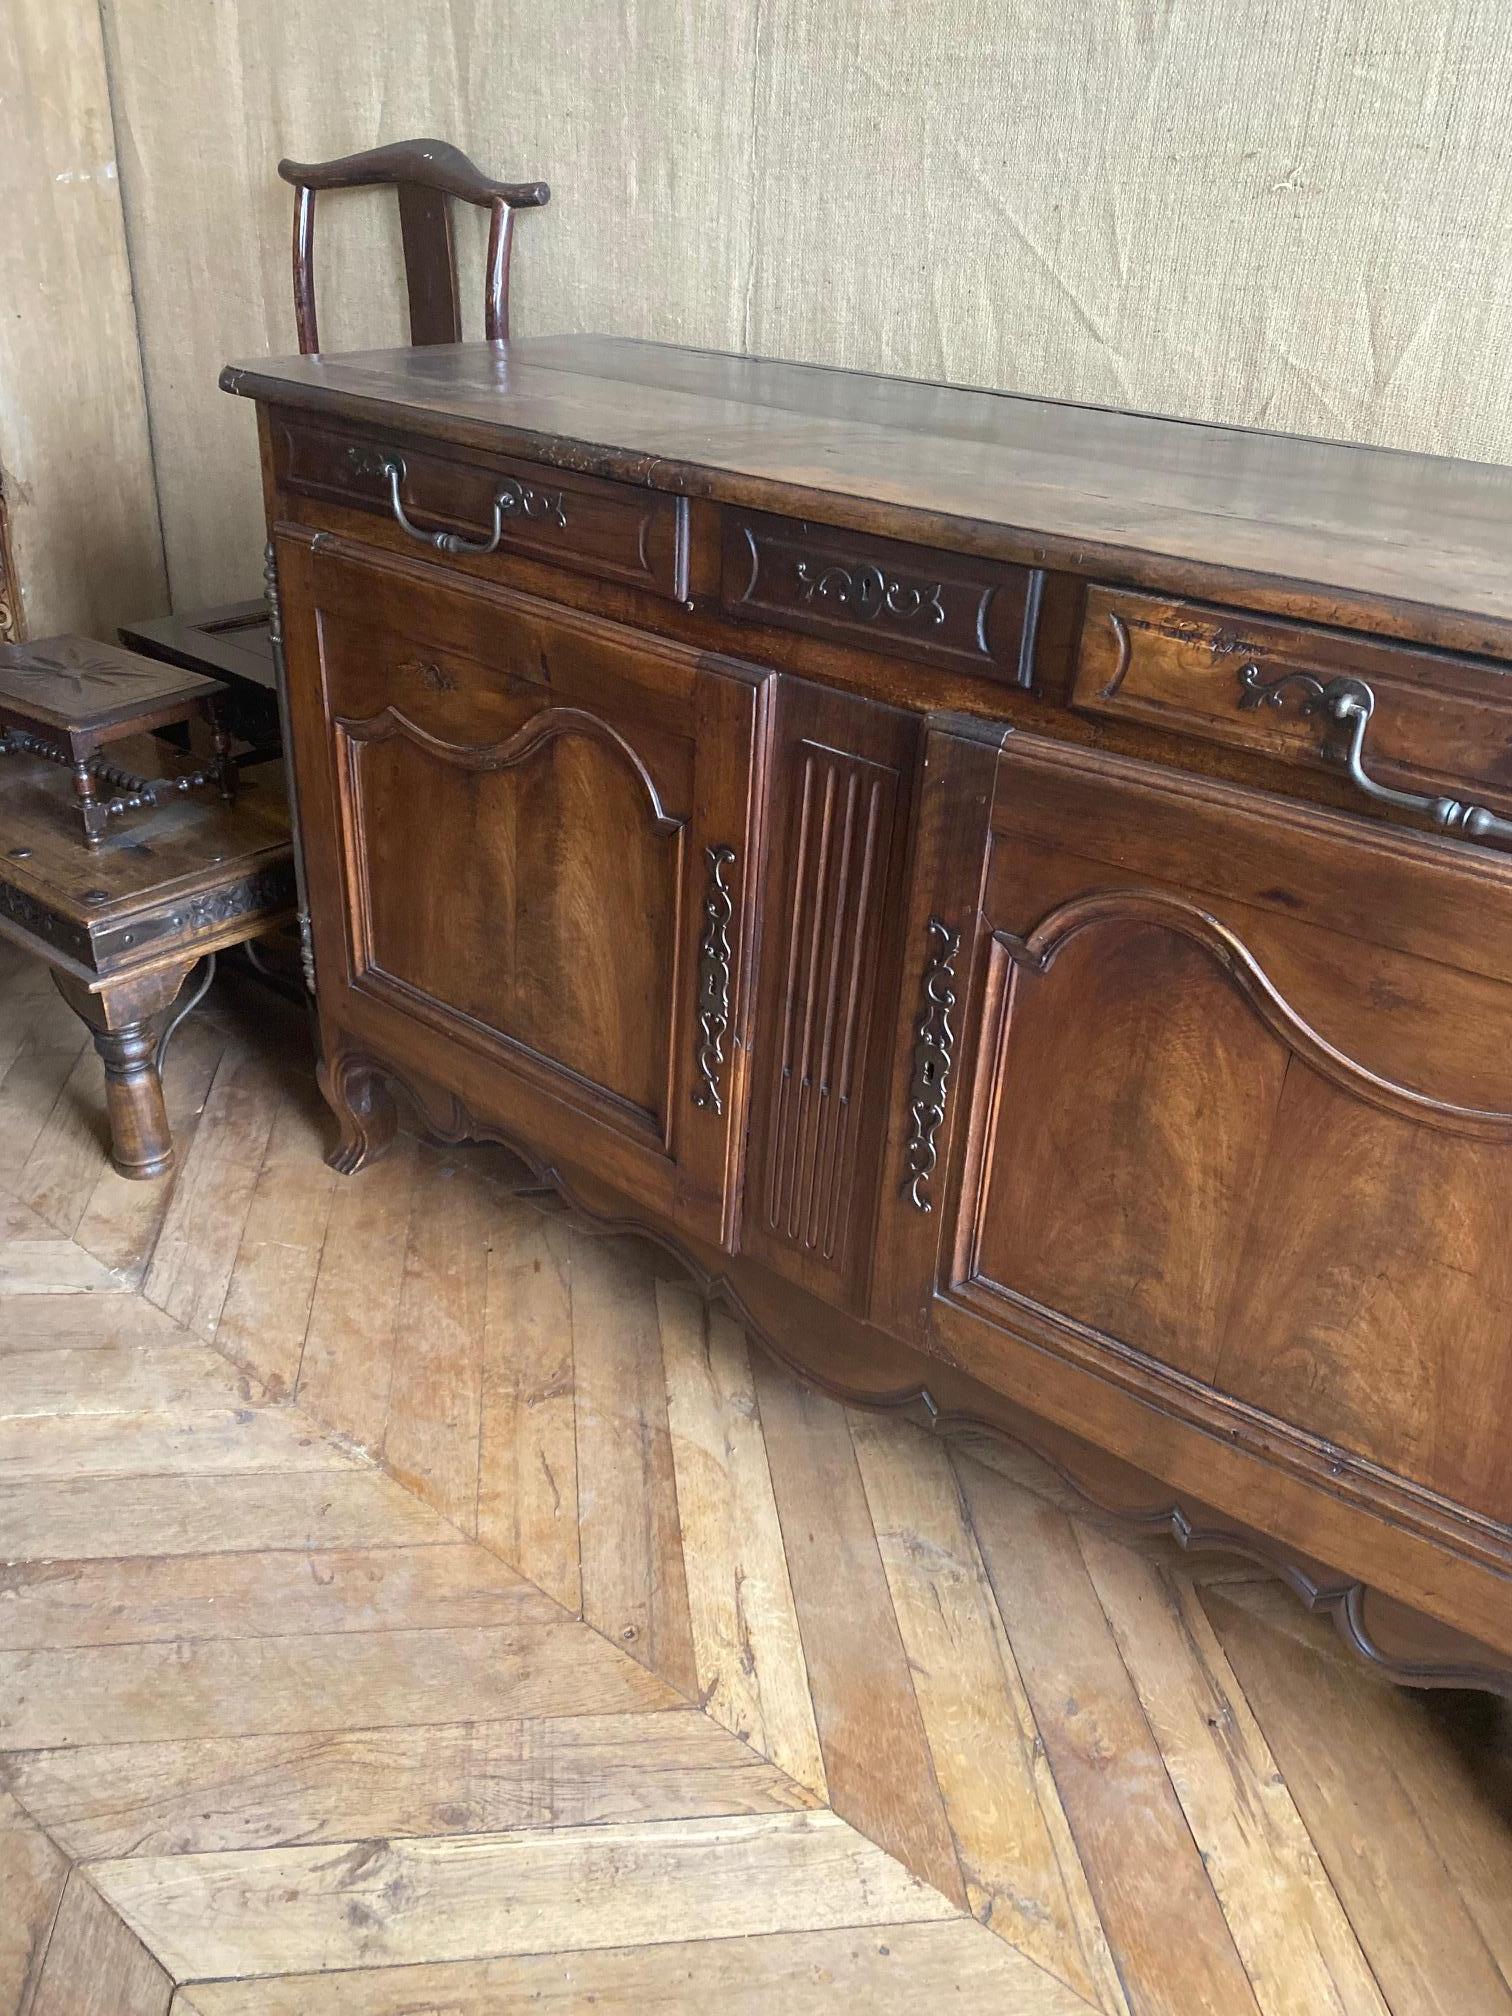 This country French server dates back to 1840. 

Measurements: 22'' D x 65.5'' W x 39'' H.